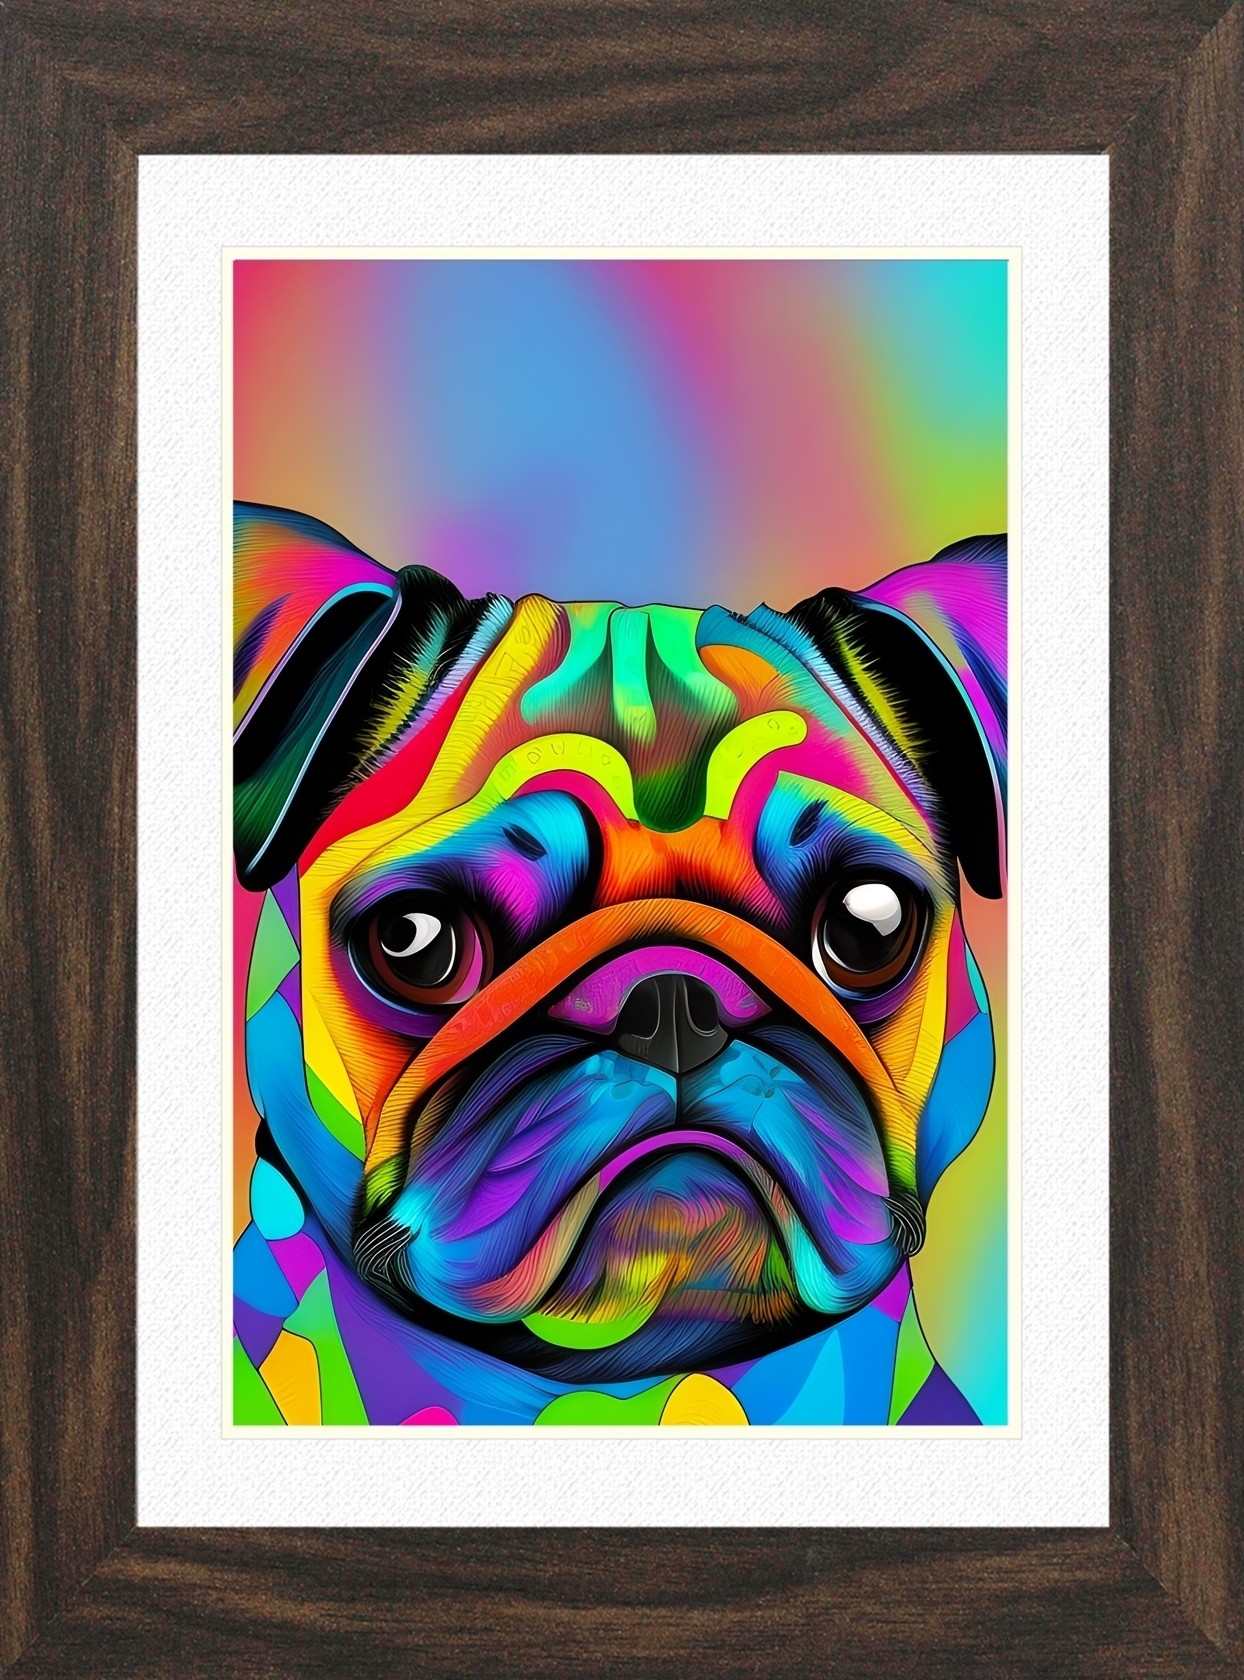 Pug Dog Picture Framed Colourful Abstract Art (30cm x 25cm Walnut Frame)